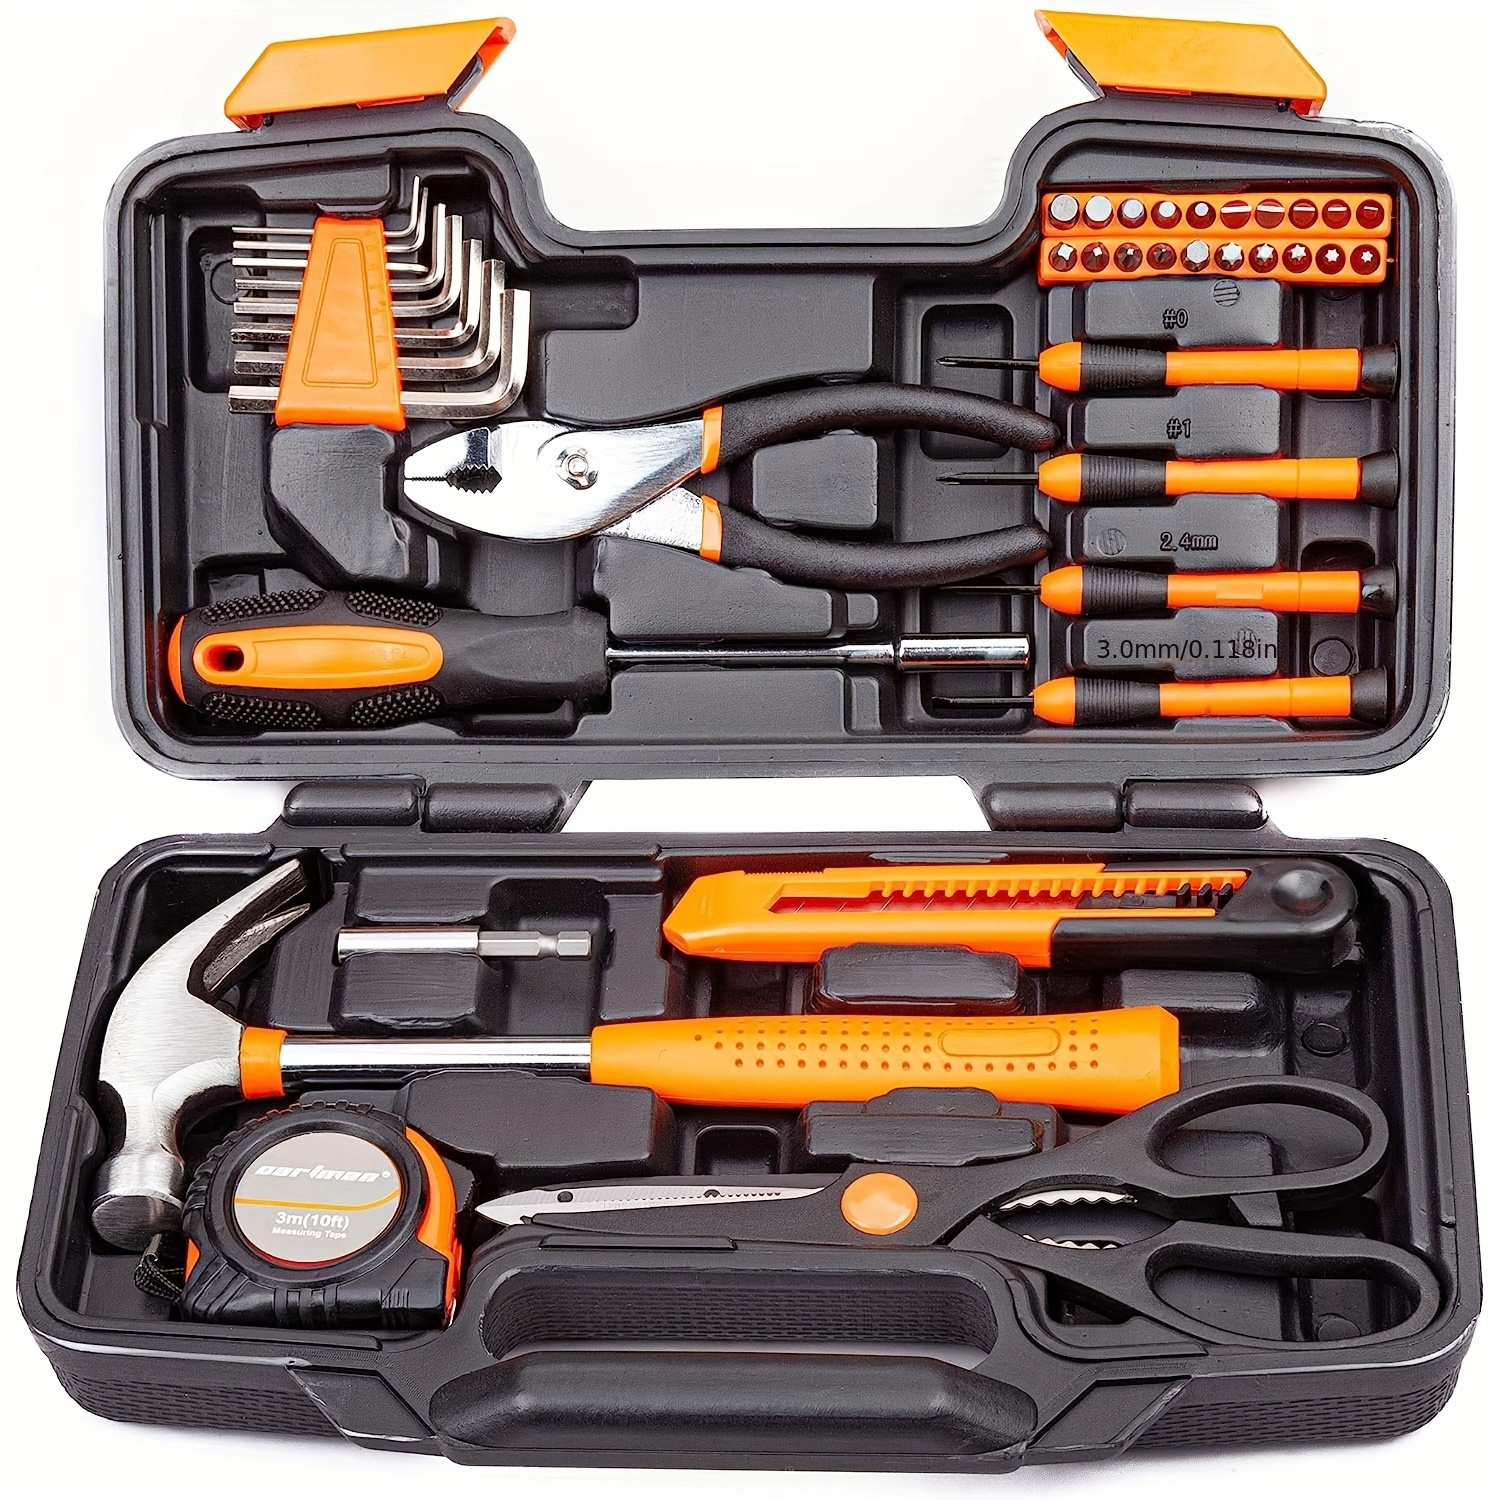 

39pcs Household Tools Kit With Plastic Toolbox Portable And Lightweight Basic Home Tool Set Emergency Tool Kit With Comprehensive Tool Box For College Students Household Use